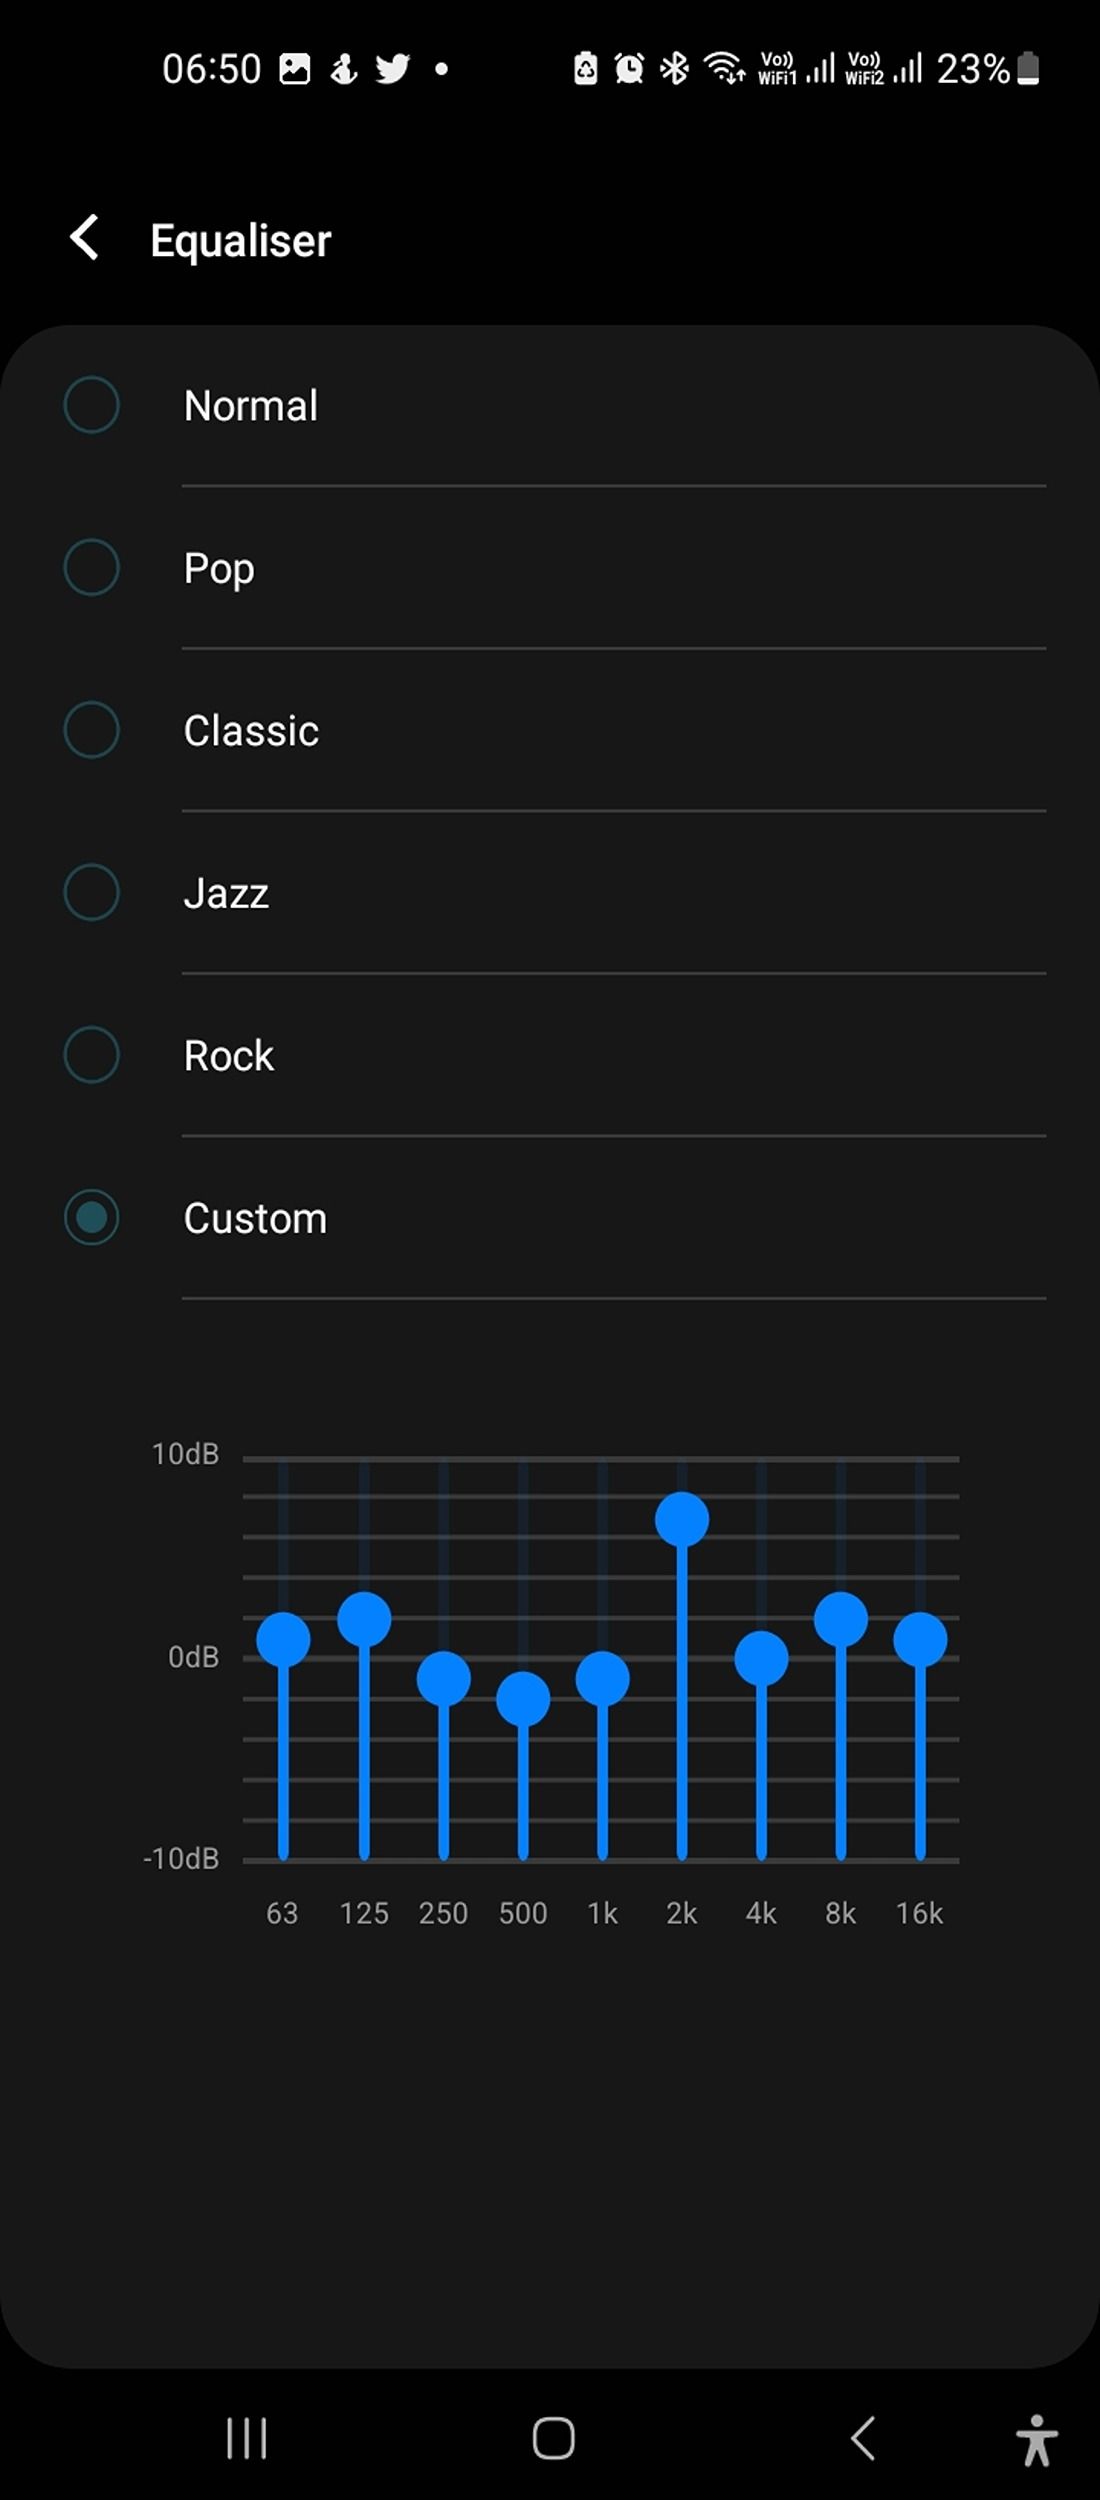 Equalizer settings on your device